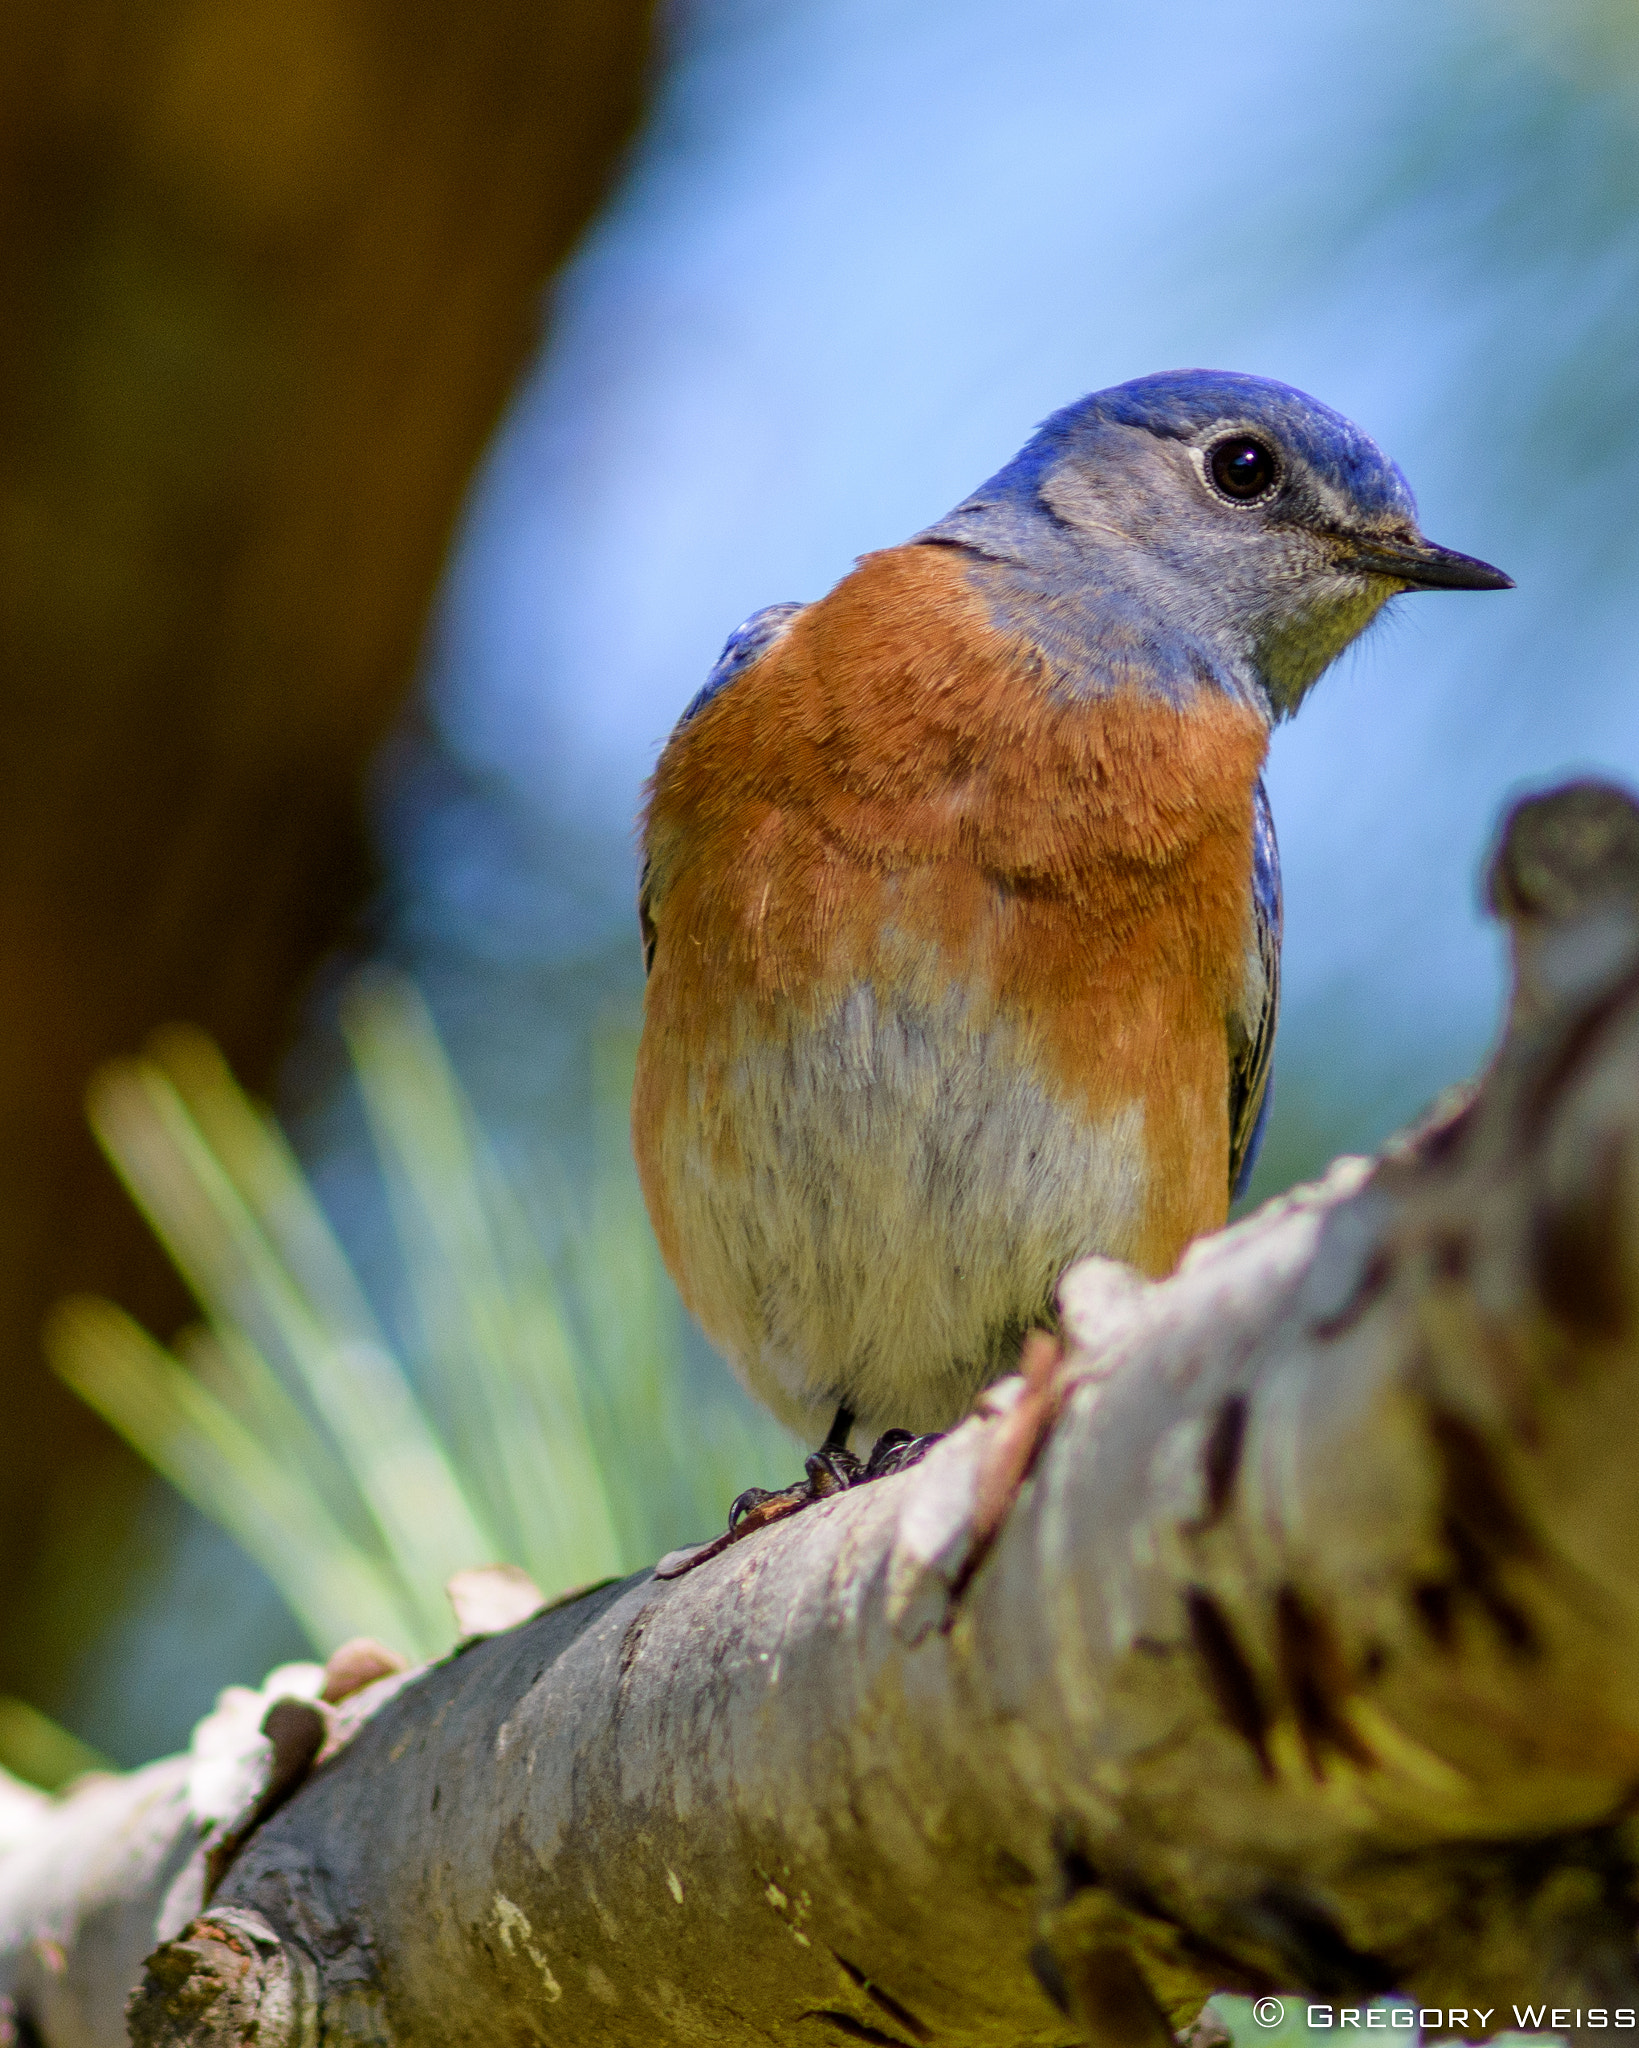 AF Nikkor 300mm f/4 IF-ED sample photo. Western bluebird checks out the neighborhood in irvine, california photography